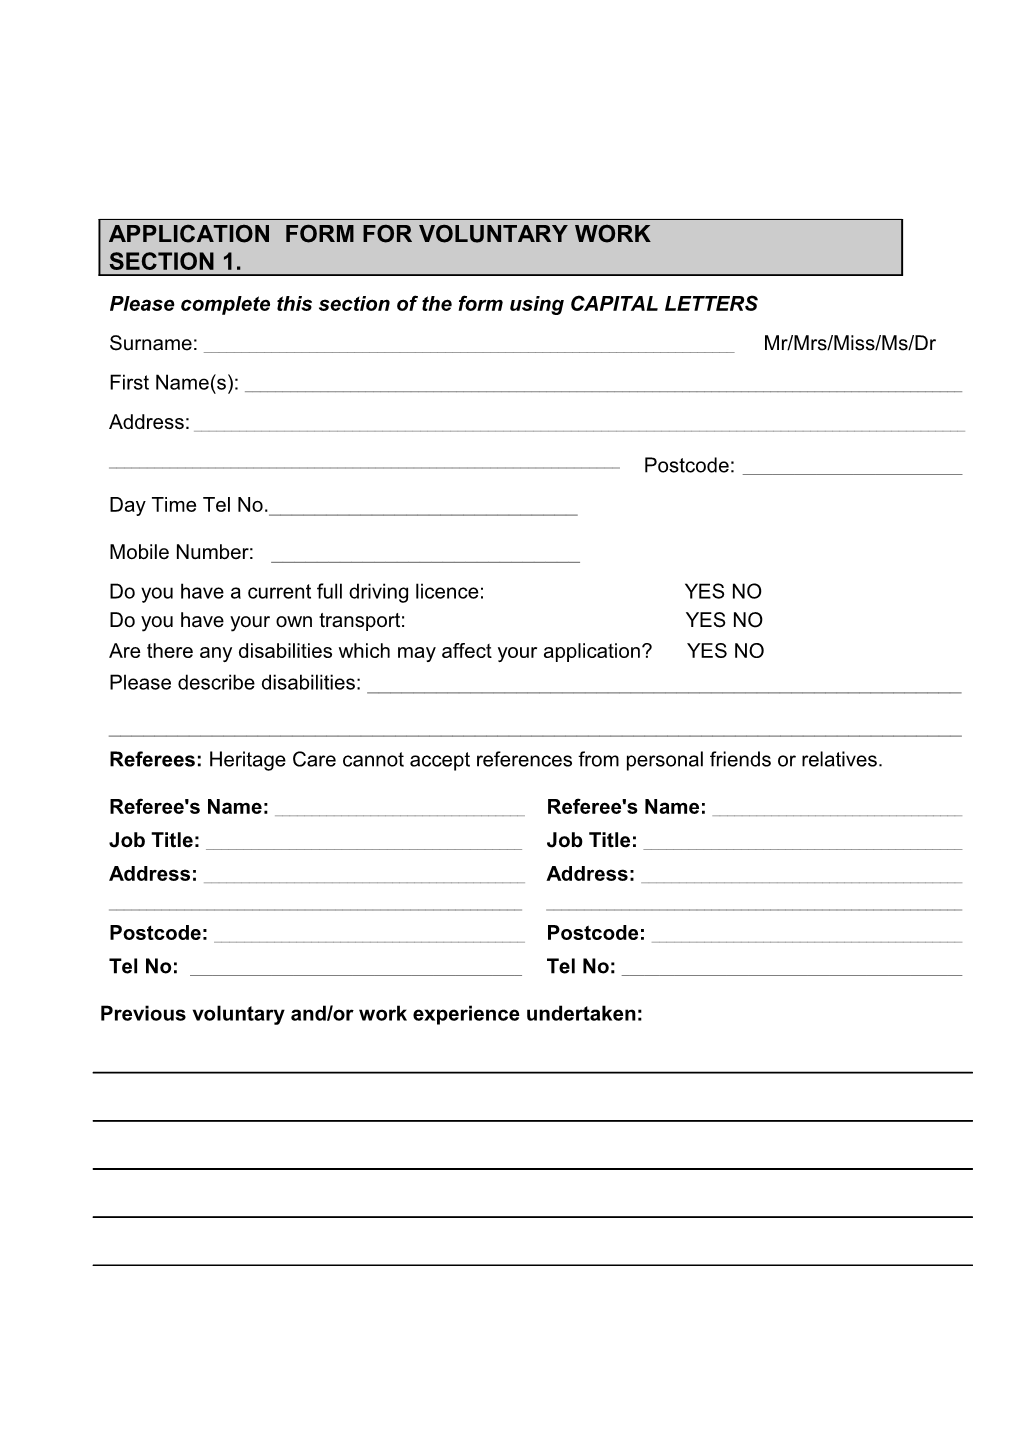 Application Form for Voluntary Work